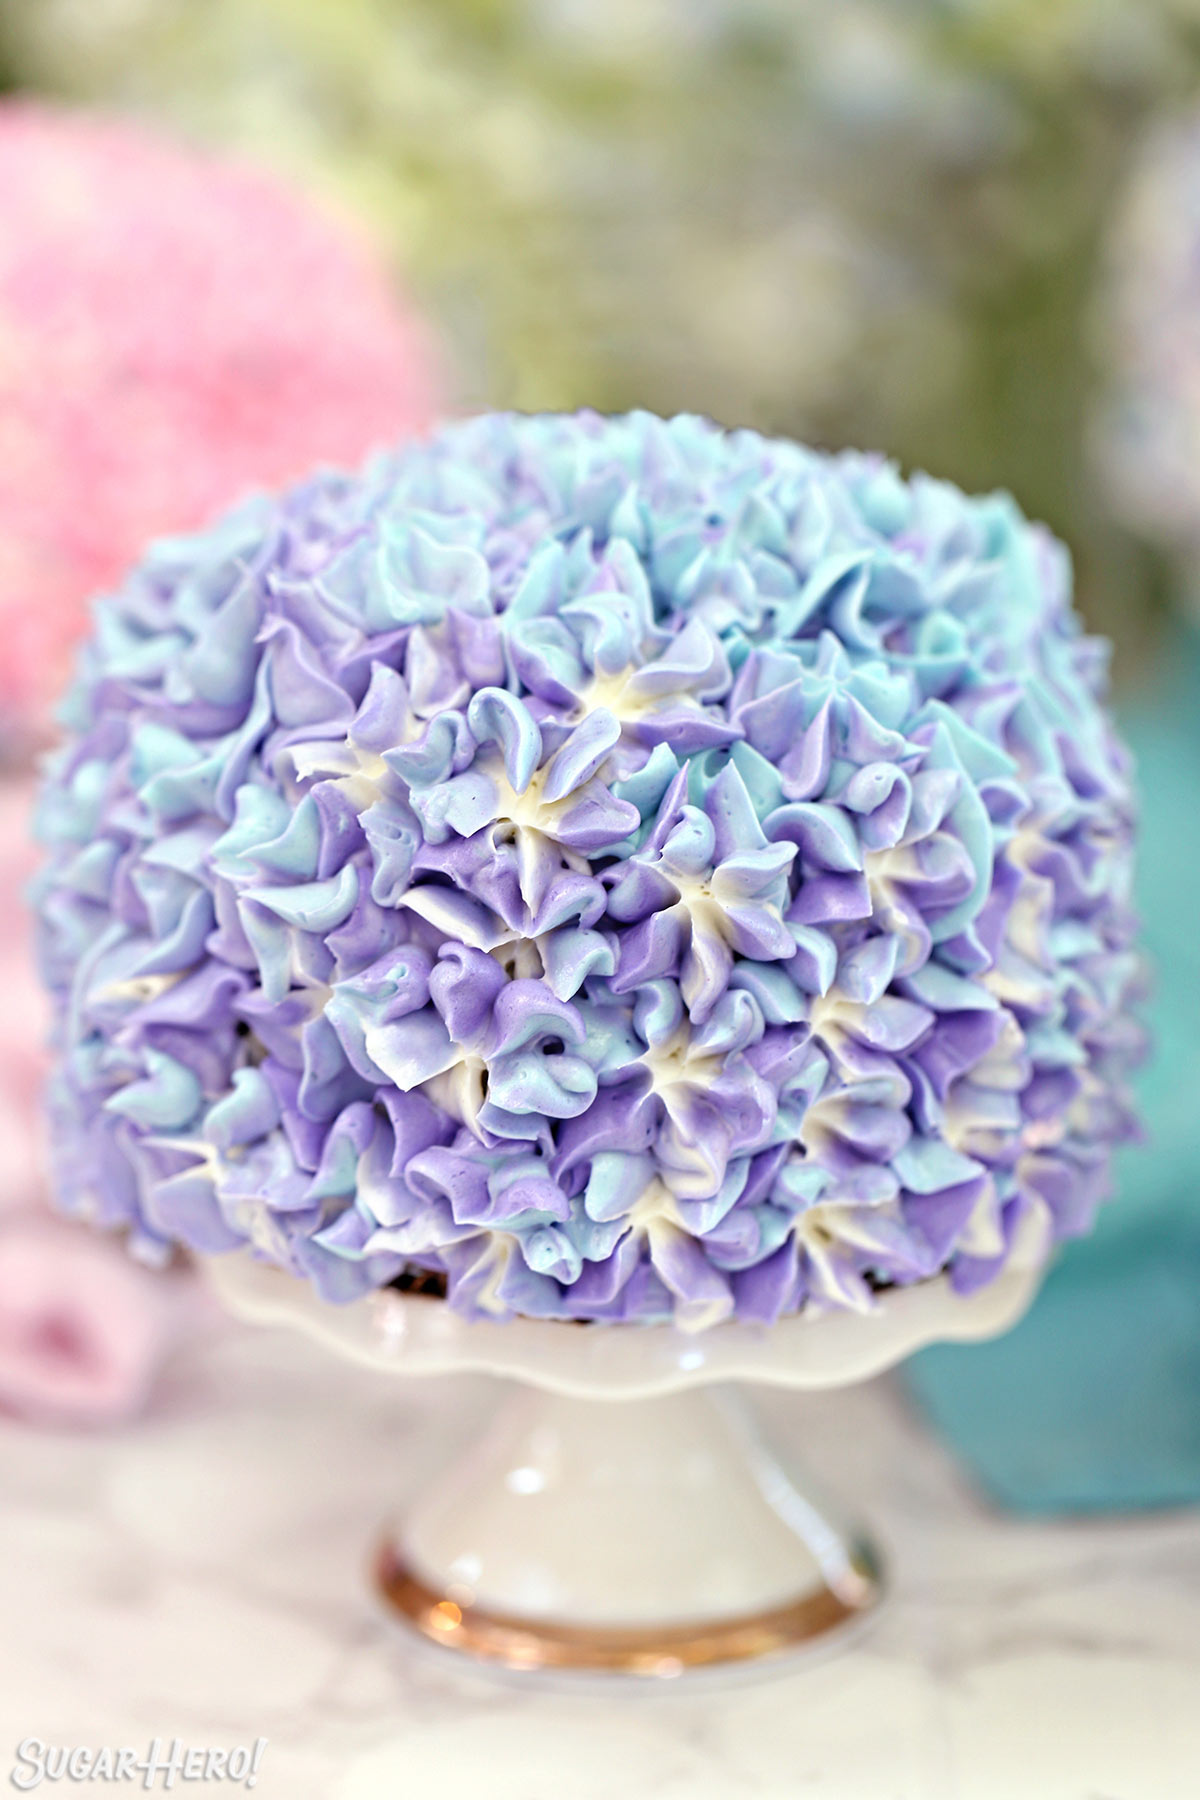 Hydrangea Cakes - A close up shot of a mini cake displayed on a stand. | From SugarHero.com